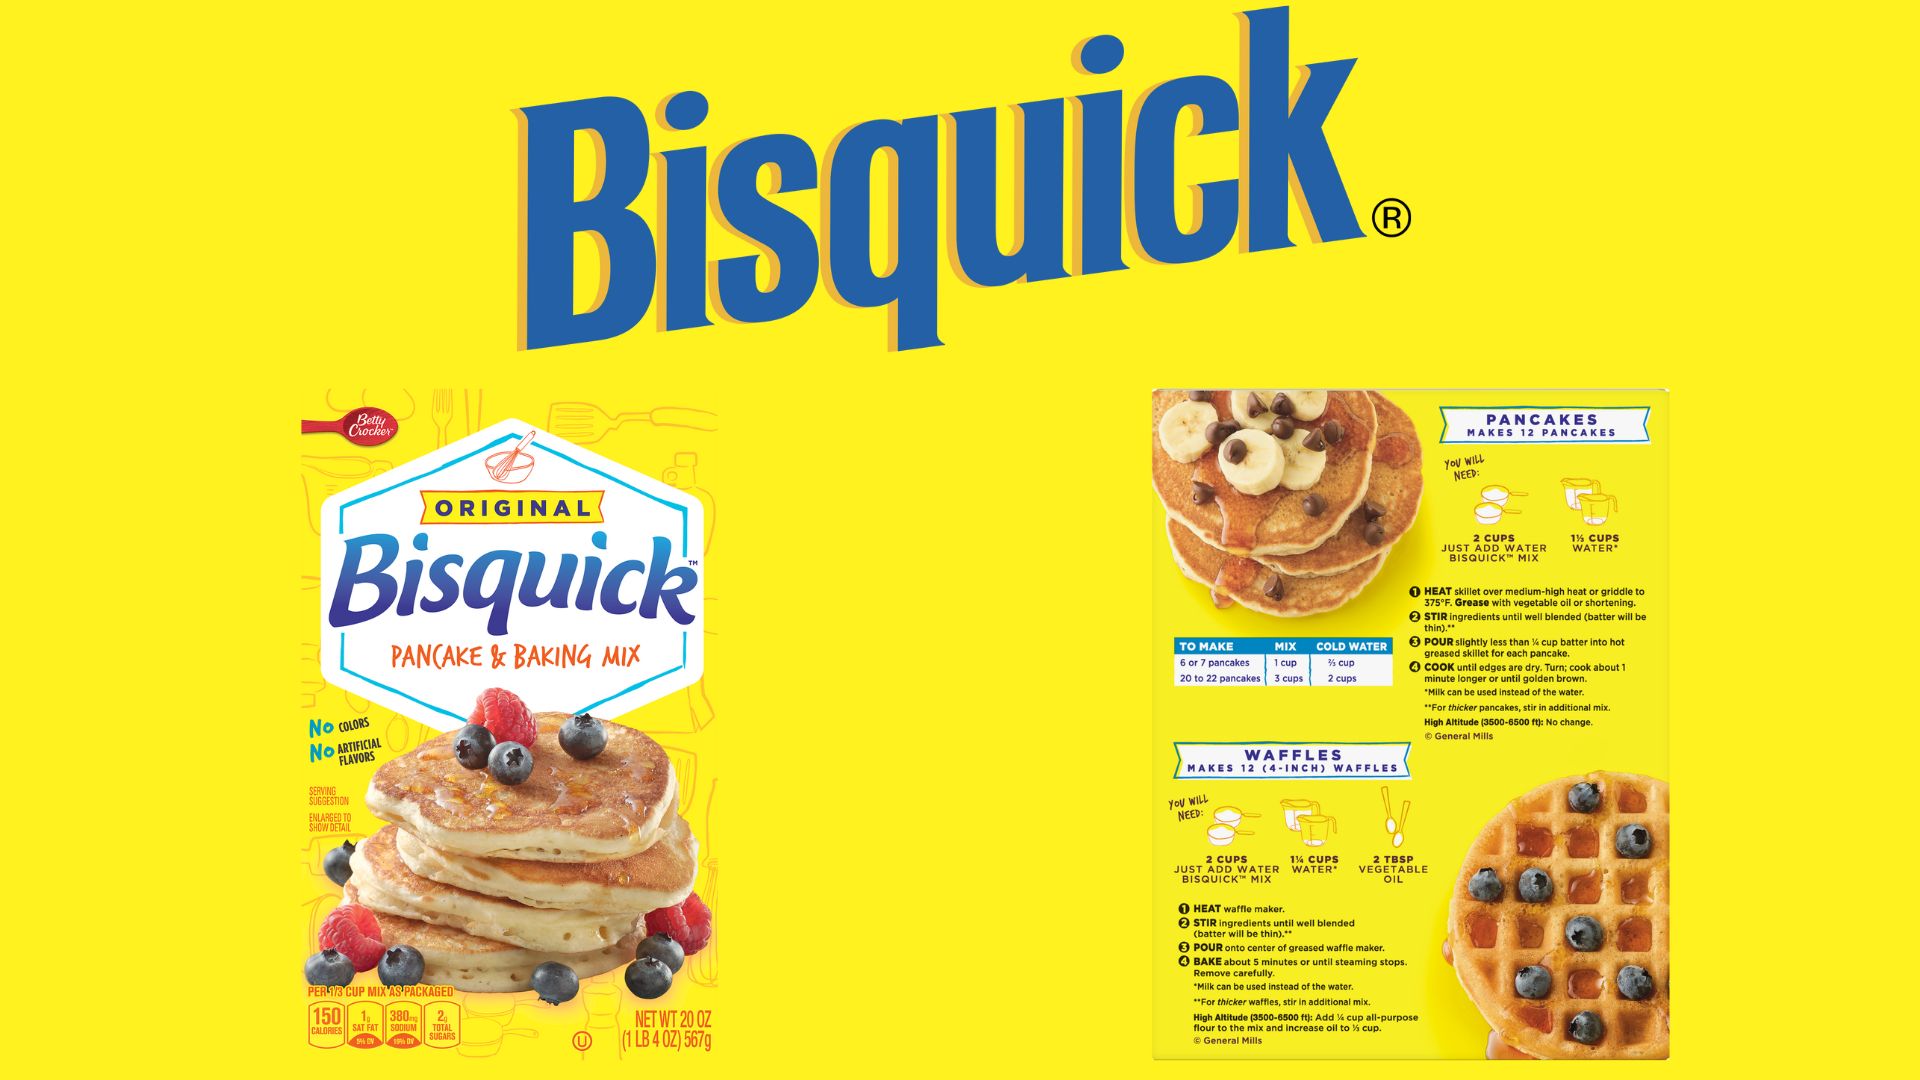 7 Tasty & Healthy Bisquick Recipes To Try Today!